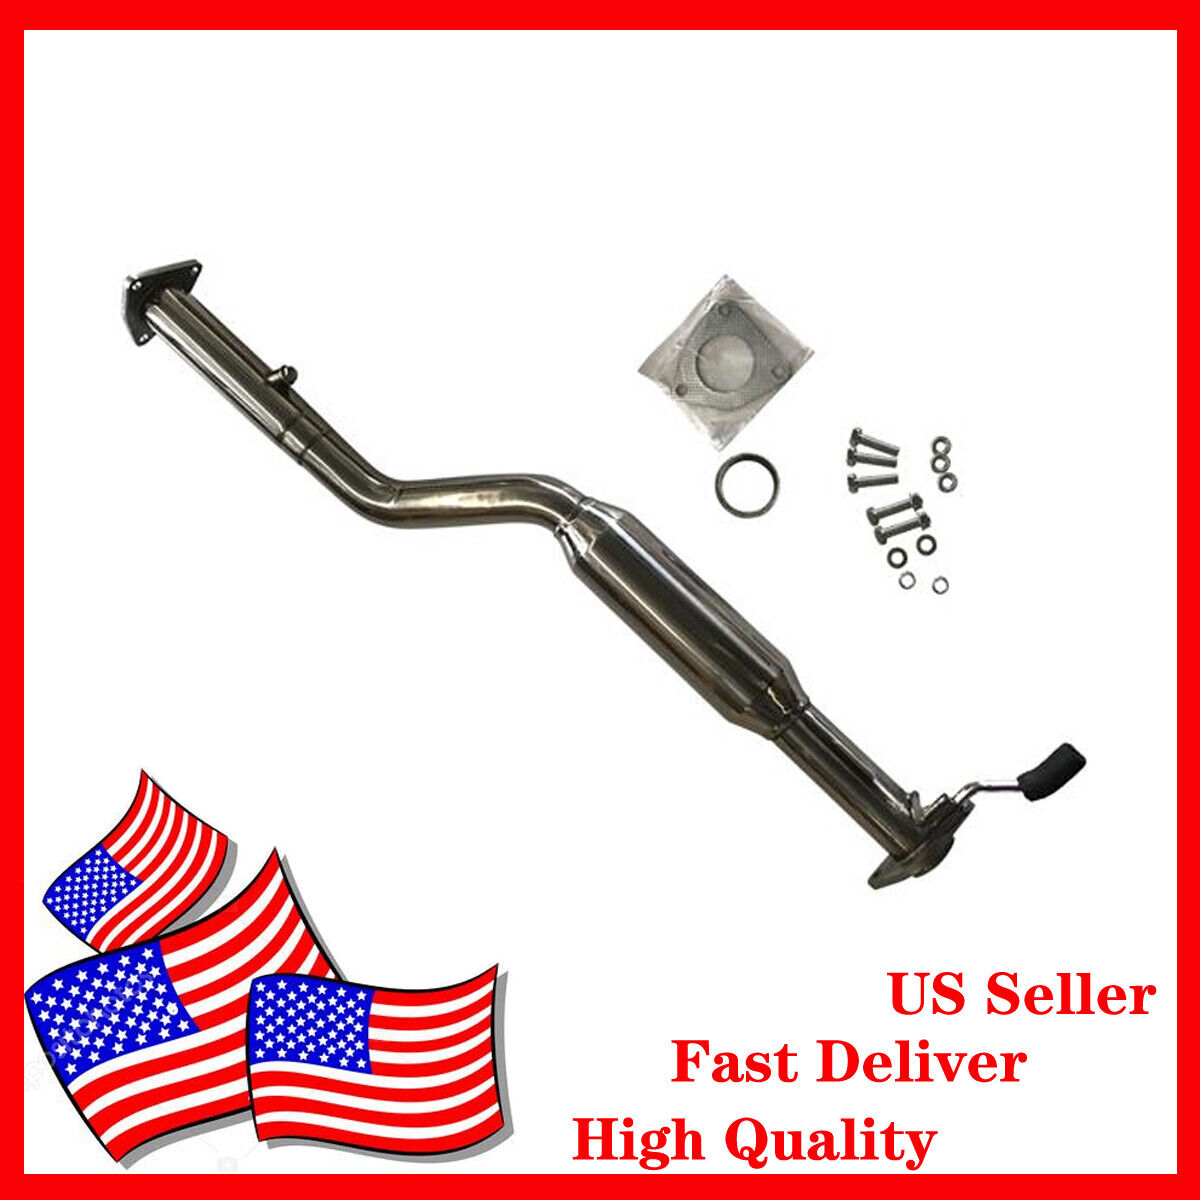 STAINLESS RACING DOWNPIPE DOWN PIPE EXHAUST 03-11 FOR MAZDA RX-8 SE3P 13B-MSP